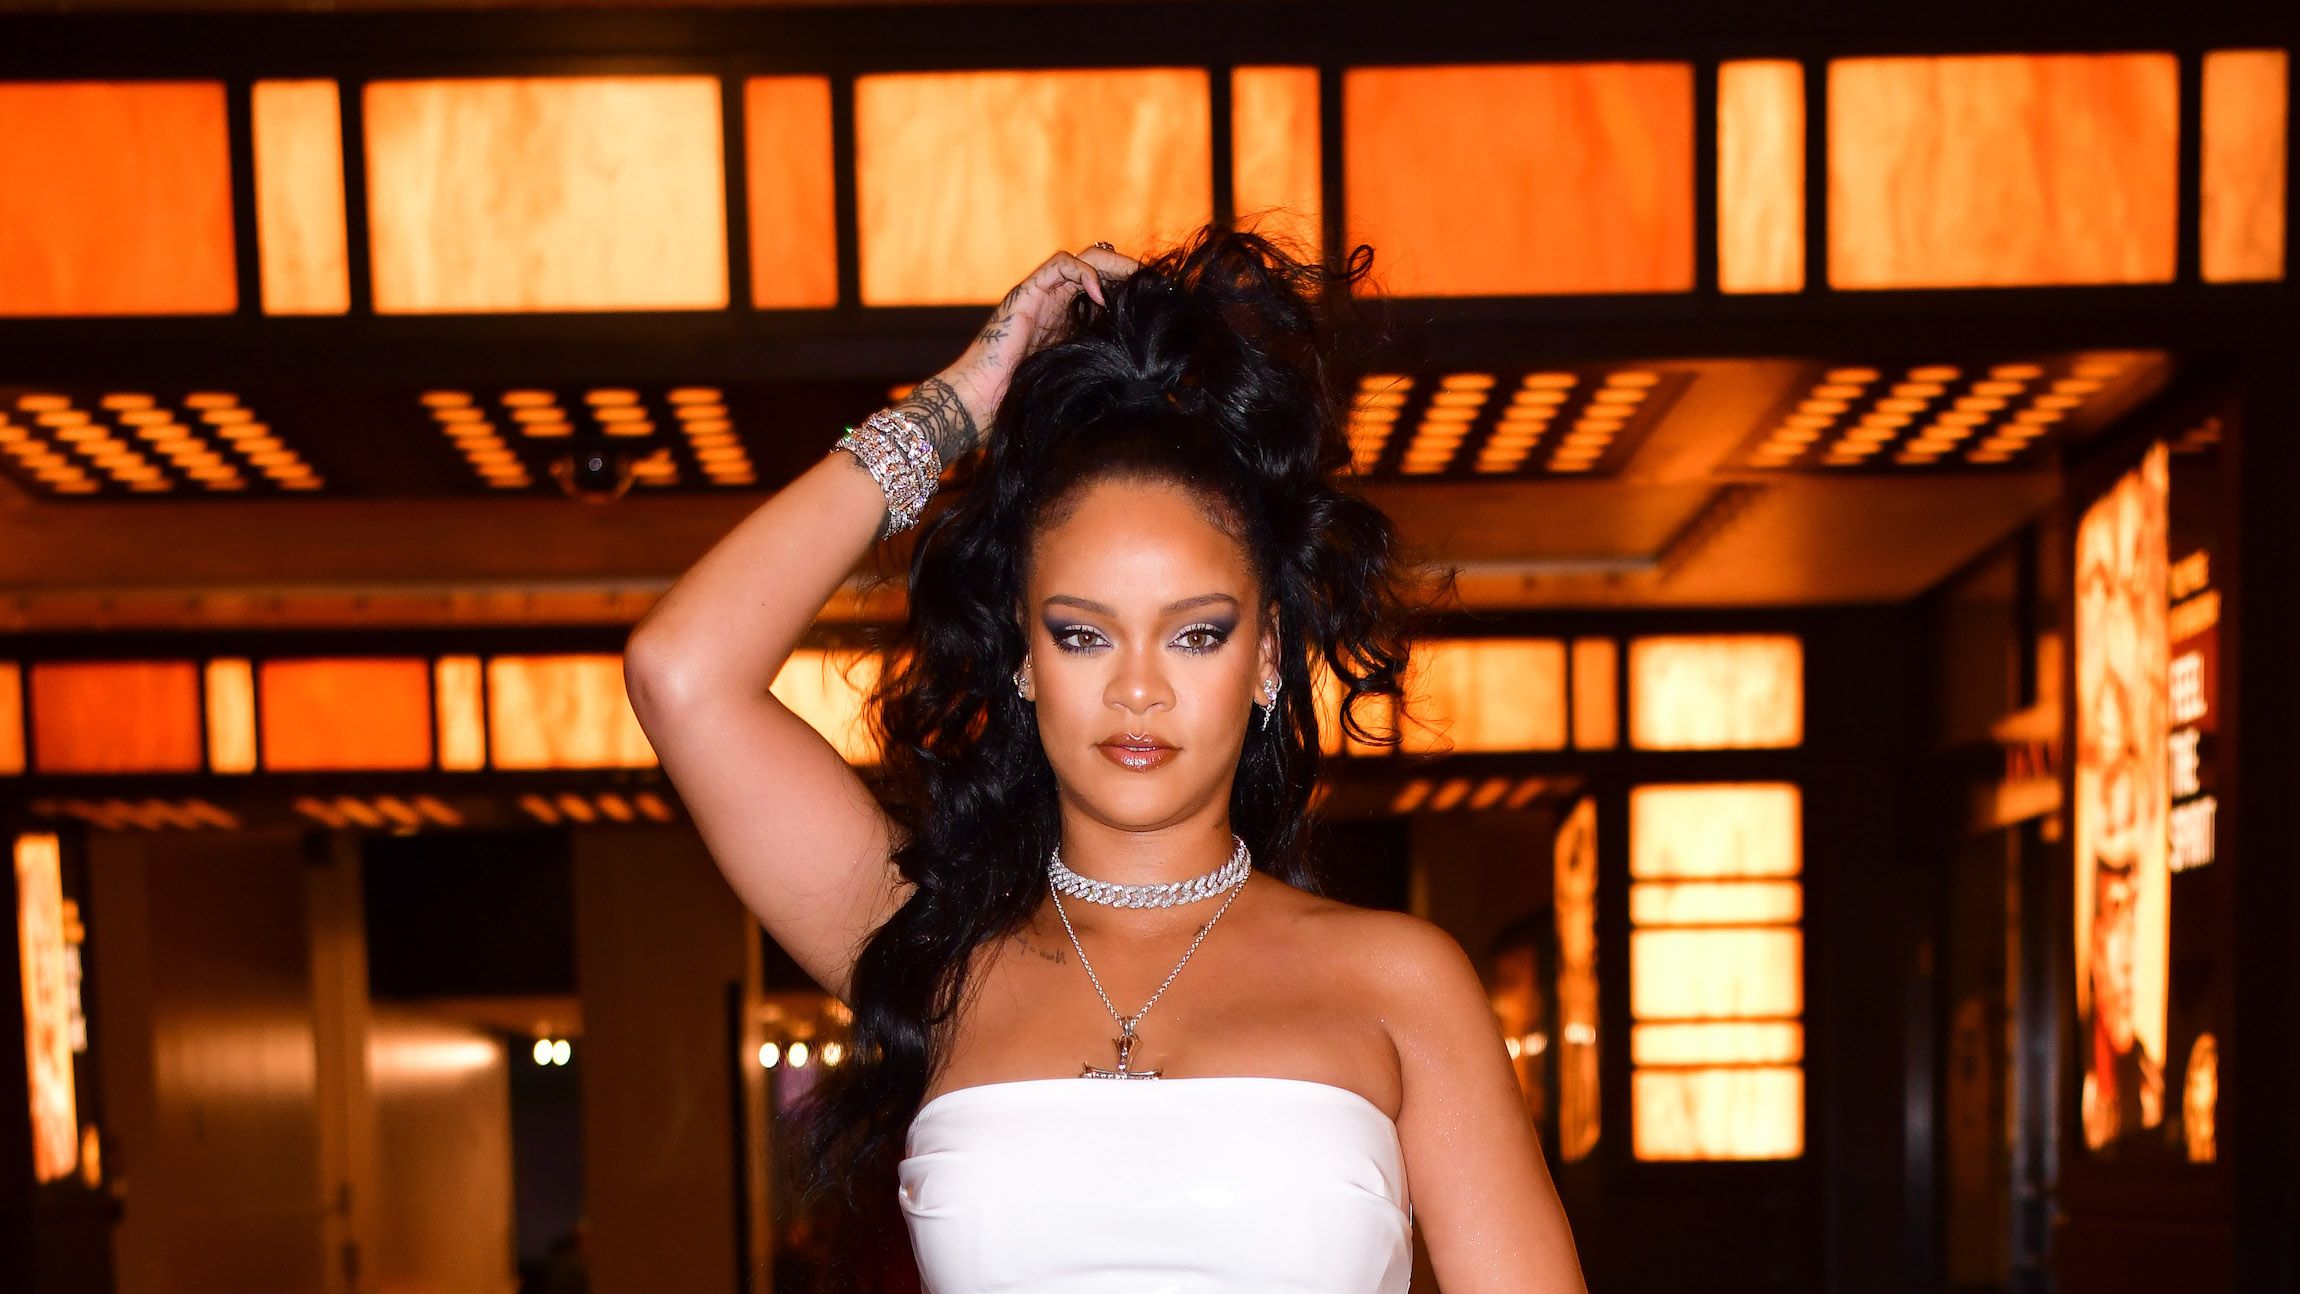 Rihanna wears a silk LBD for night out in New York